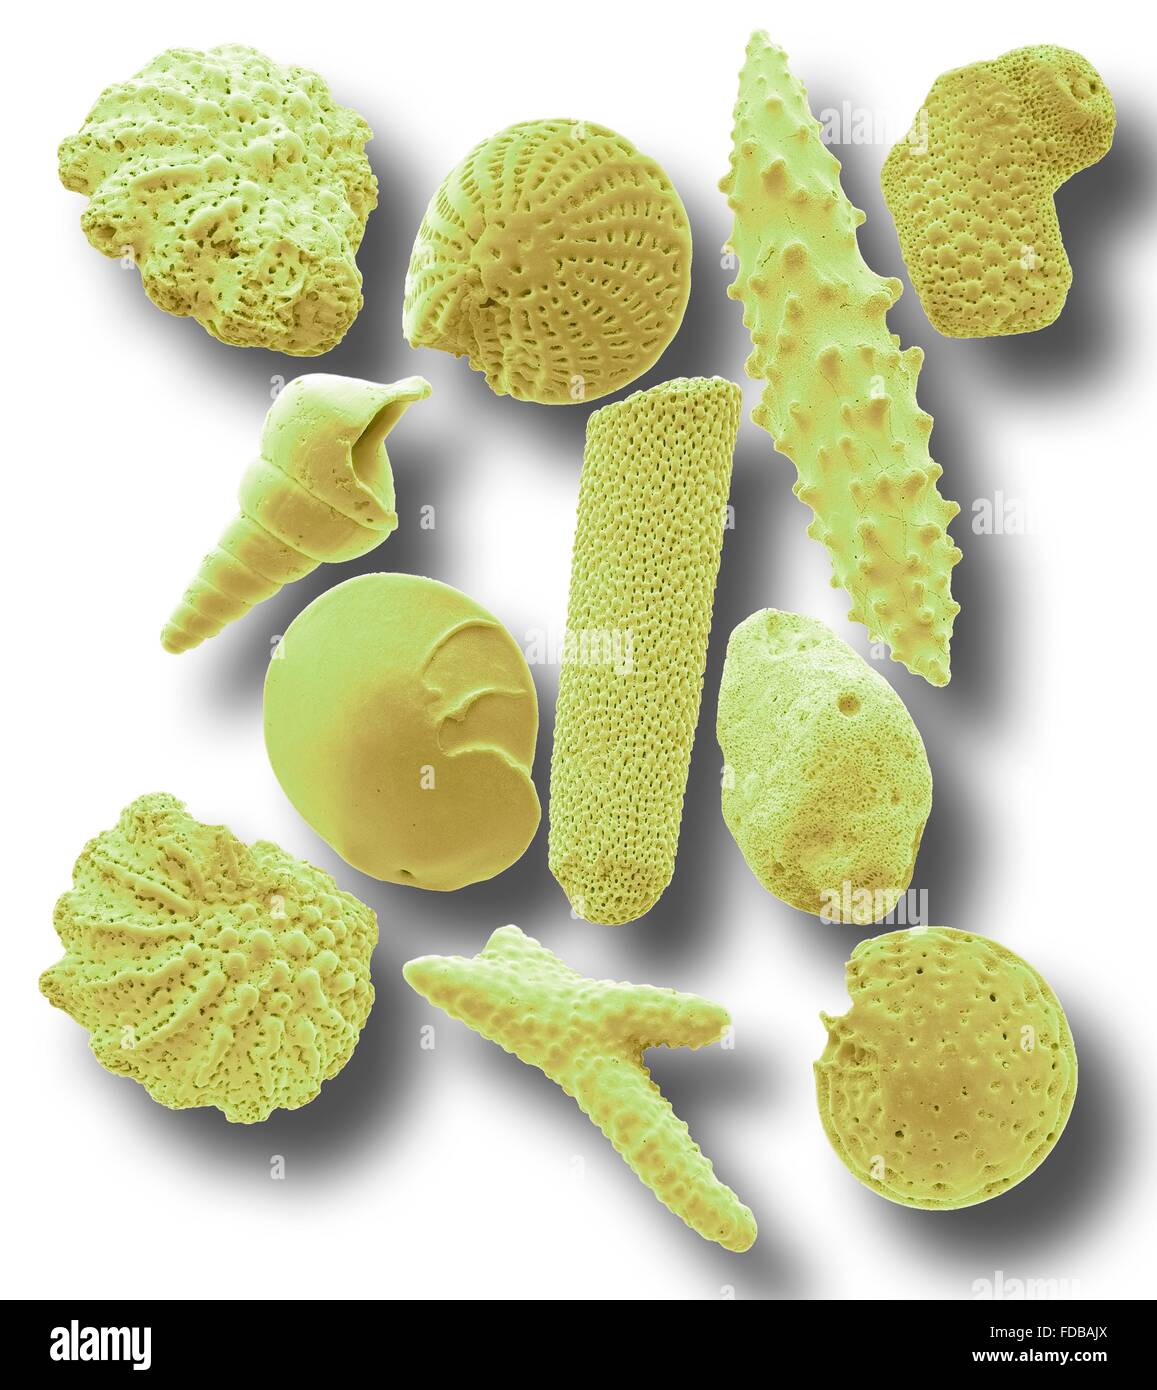 Sand microfossils. Coloured scanning electron micrograph (SEM) of microfossils from maldives beach sand. Microfossils are roughly 0.05 to 2mm in size. These are the remains of complete organisms, the common ones are foraminifera, ostracods and sponge spicules. Magnification: x 40 when printed at 10 centimetres wide. Stock Photo